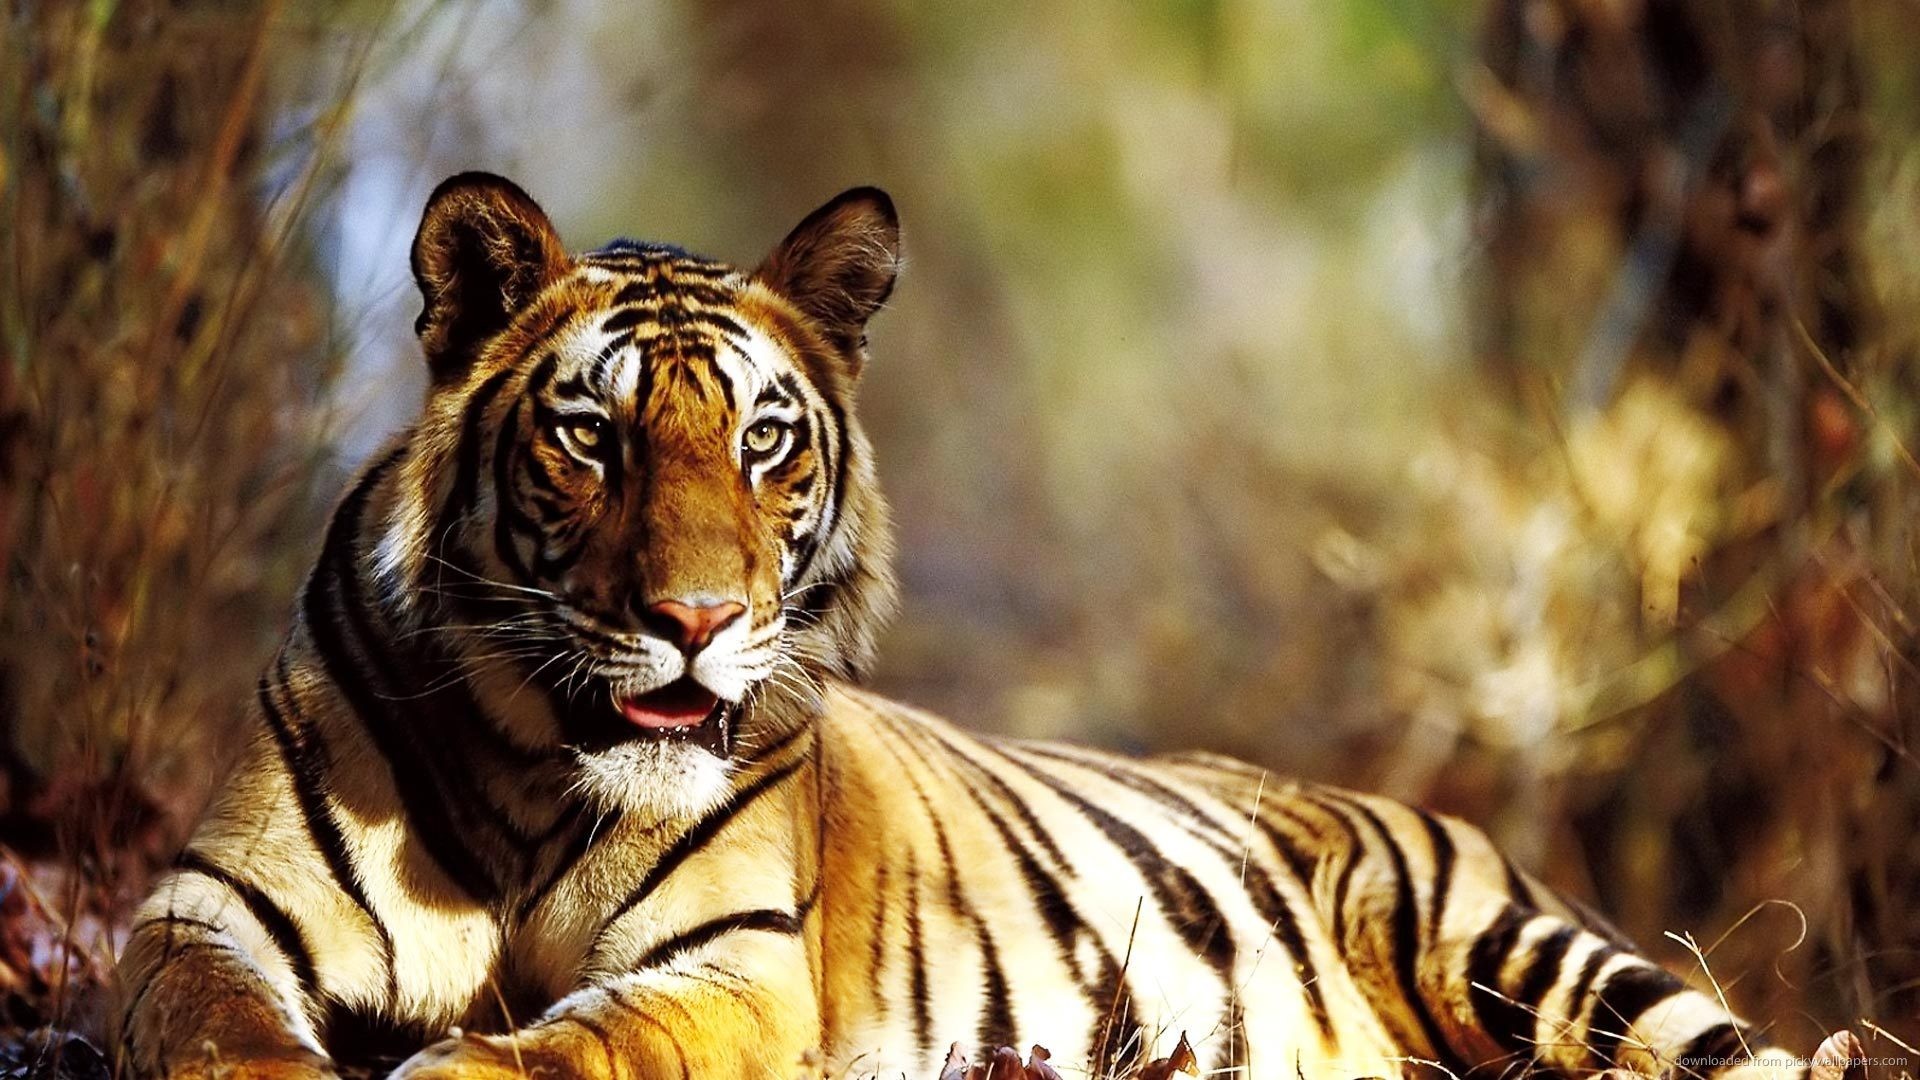 1920x1080 Tiger HD Wallpapers Full High Quality New Backgrounds